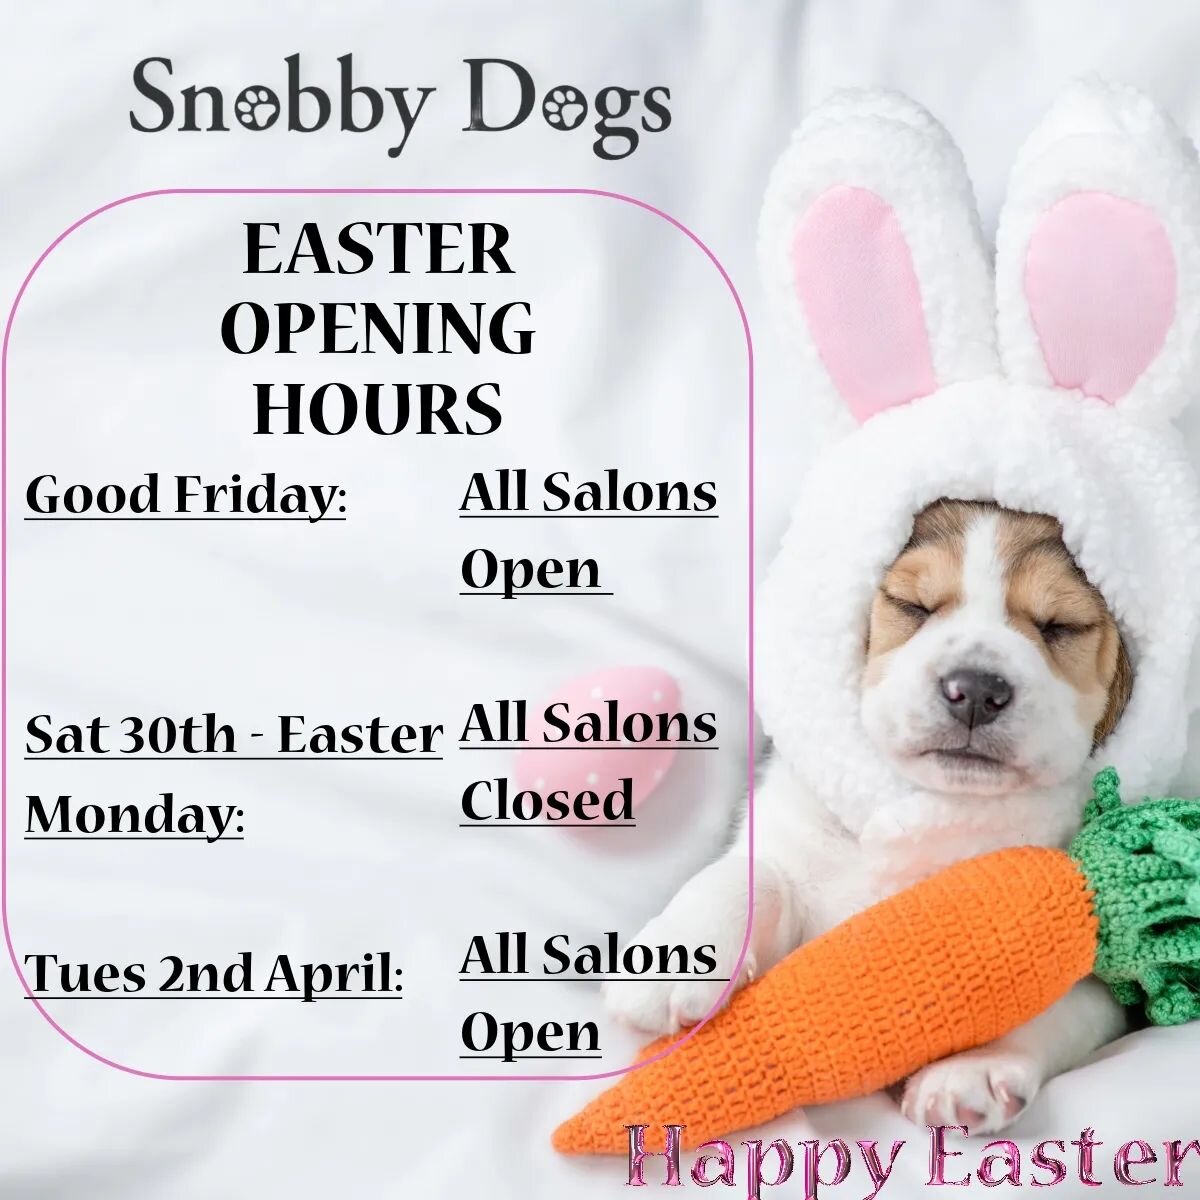 🐣Easter Opening for all Snobby Dogs Salons🐣

#easter #easterbunny #easterpuppy #easterdog #easter2024 #happyeaster #eastertradinghours #easteropeninghours #doggroominguk #doggroomingmanchester #doggroomingstockport #dogsgram #instadog #instagood #i